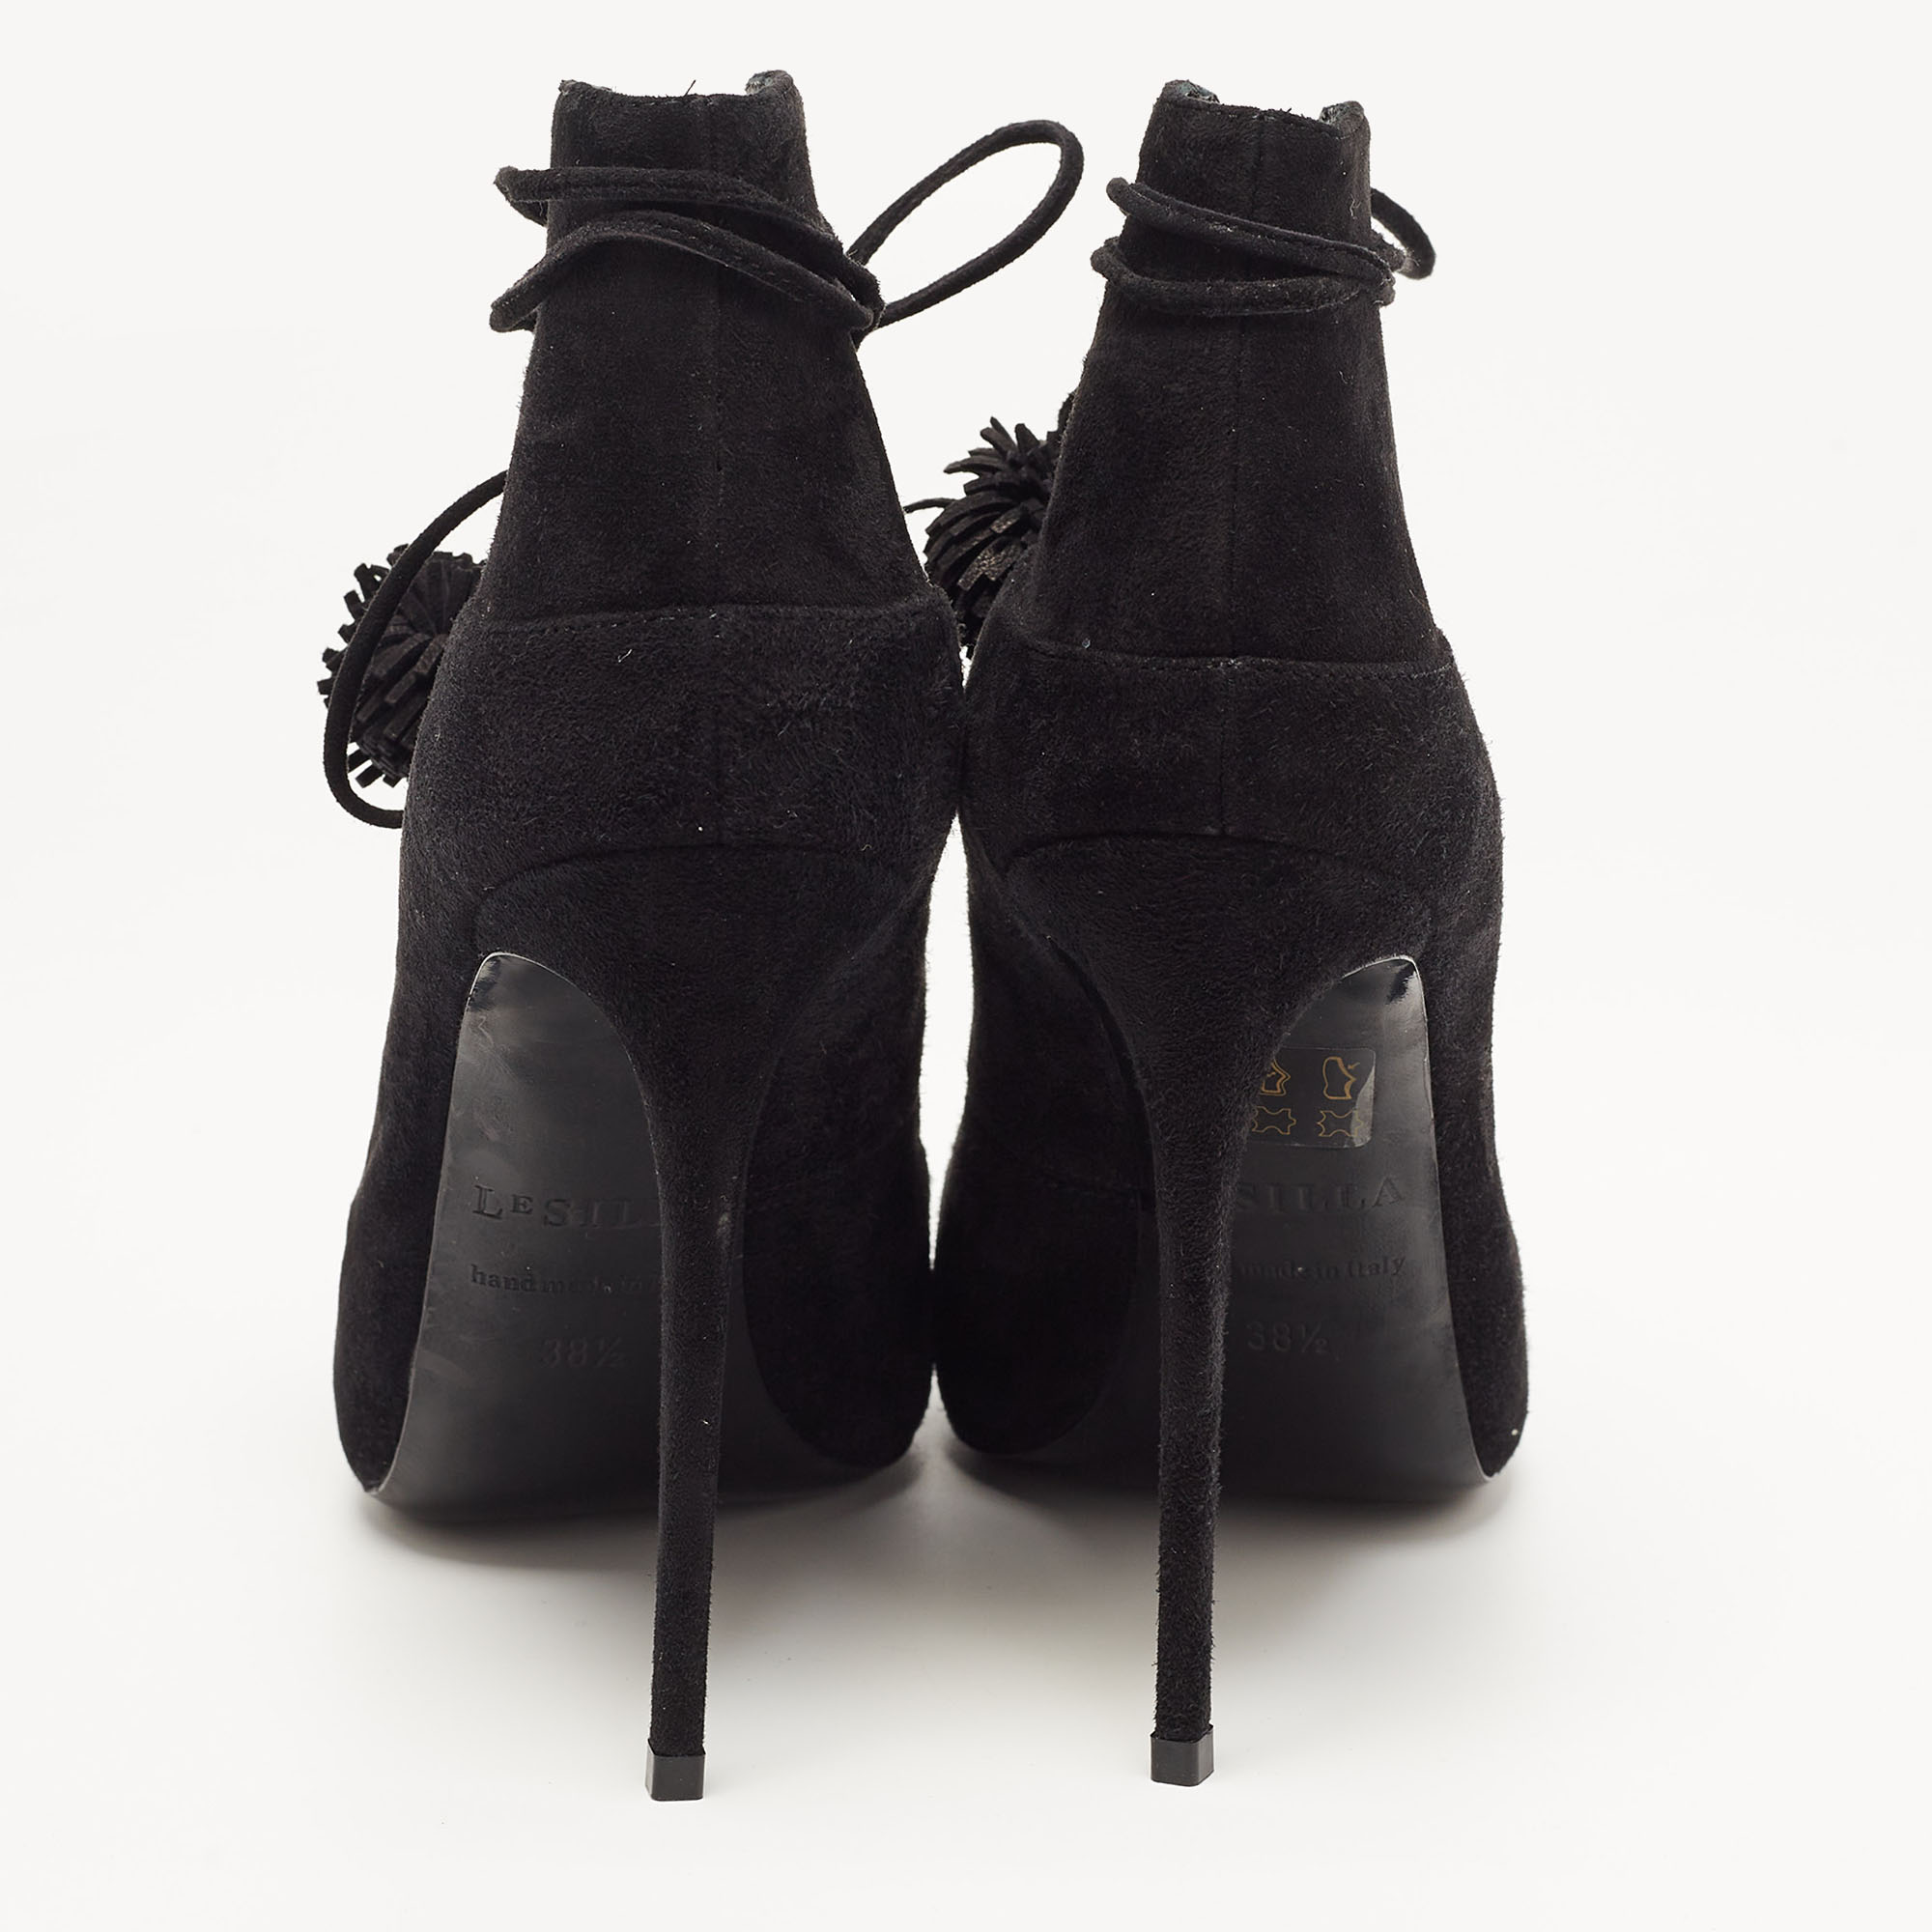 Le Silla Black Suede Lace Up Pointed Toe Ankle Booties 38.5